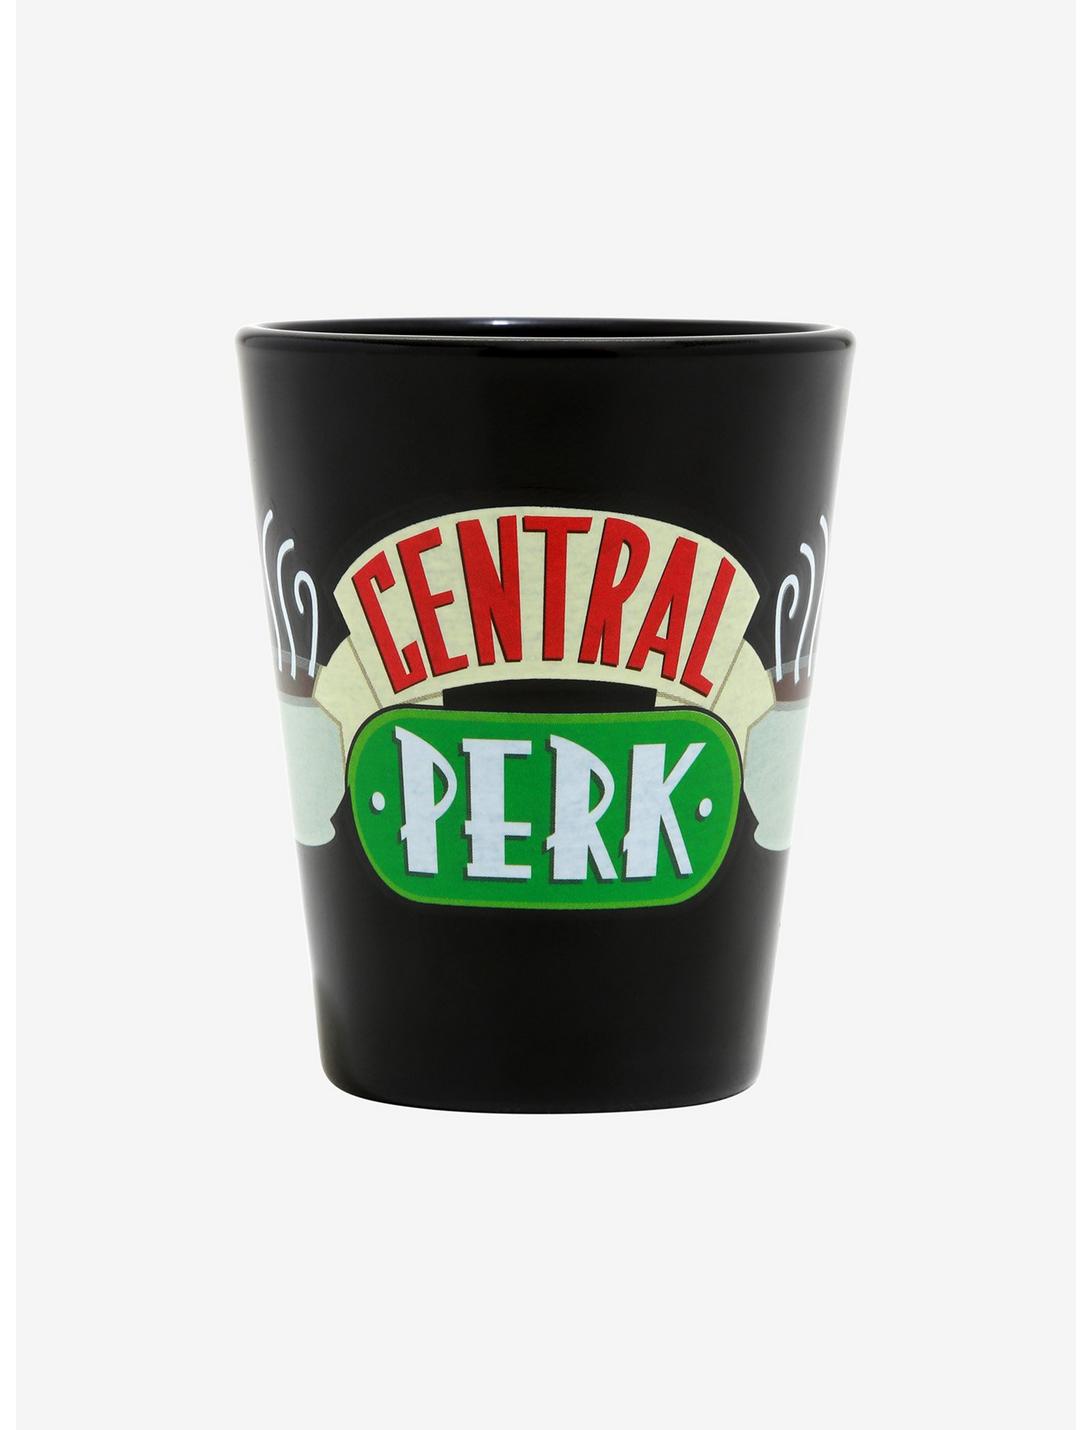 Friends Central Perk Mini Glass - BoxLunch Exclusive, , hi-res